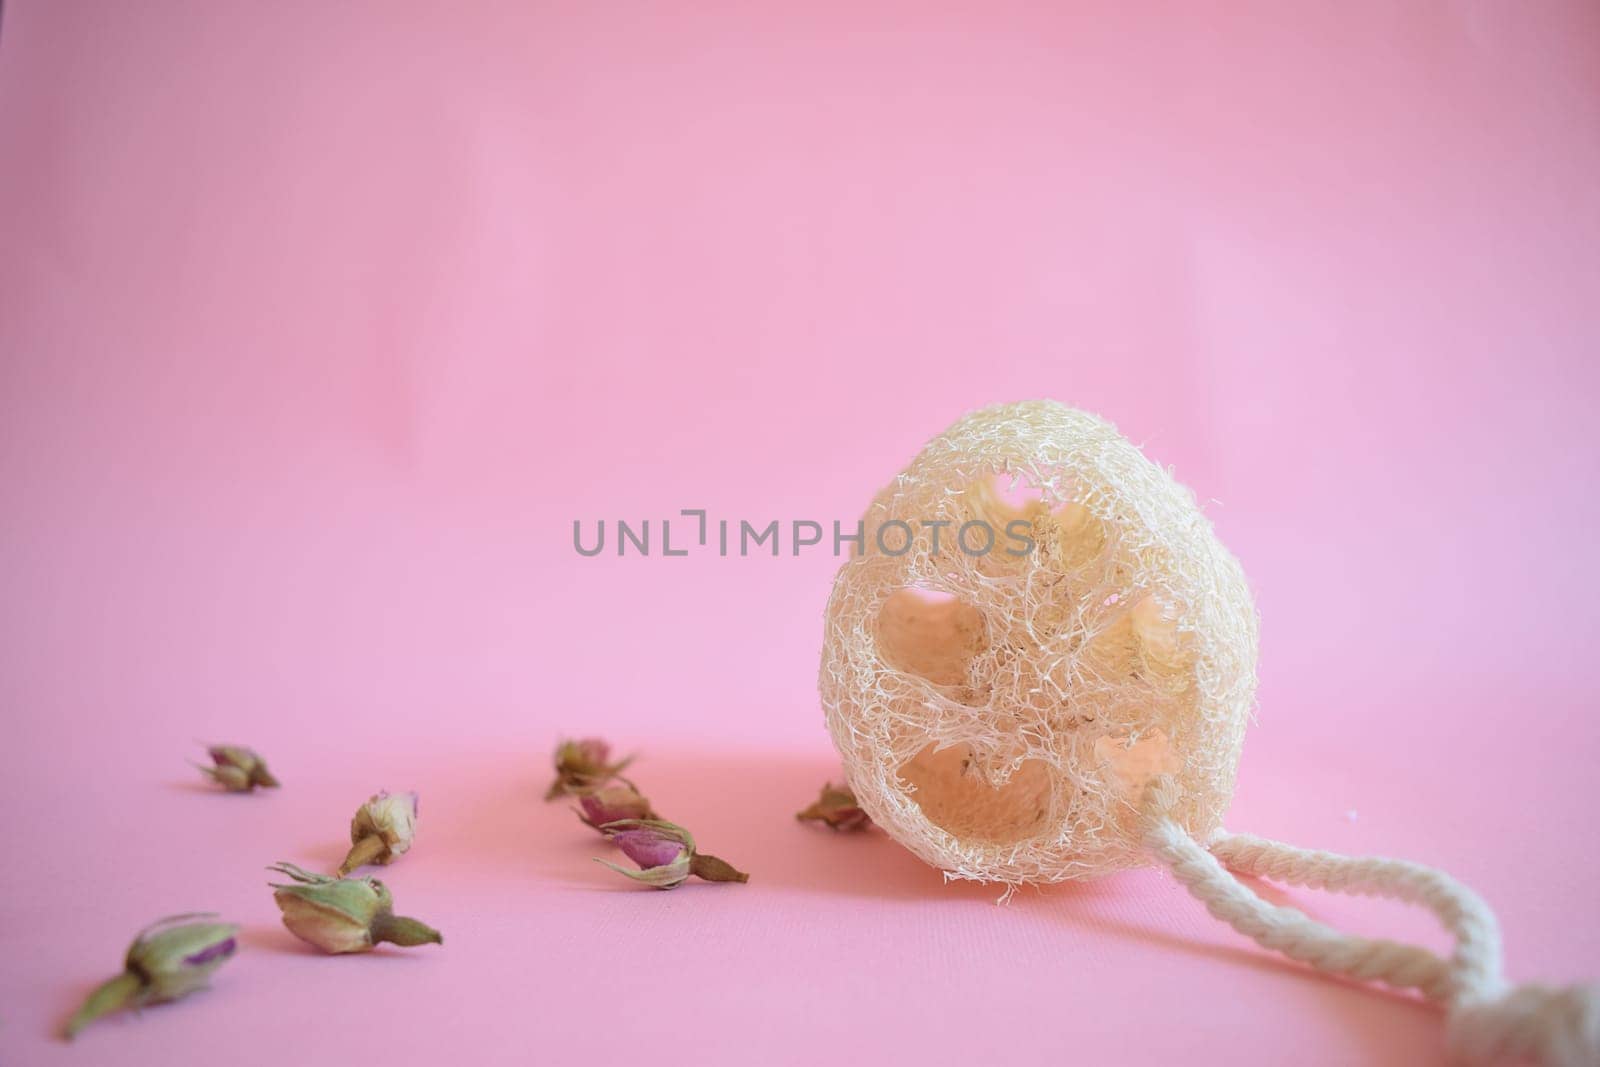 Natural Luffa Sponge. Body scrap with natural sponge on a pink background.